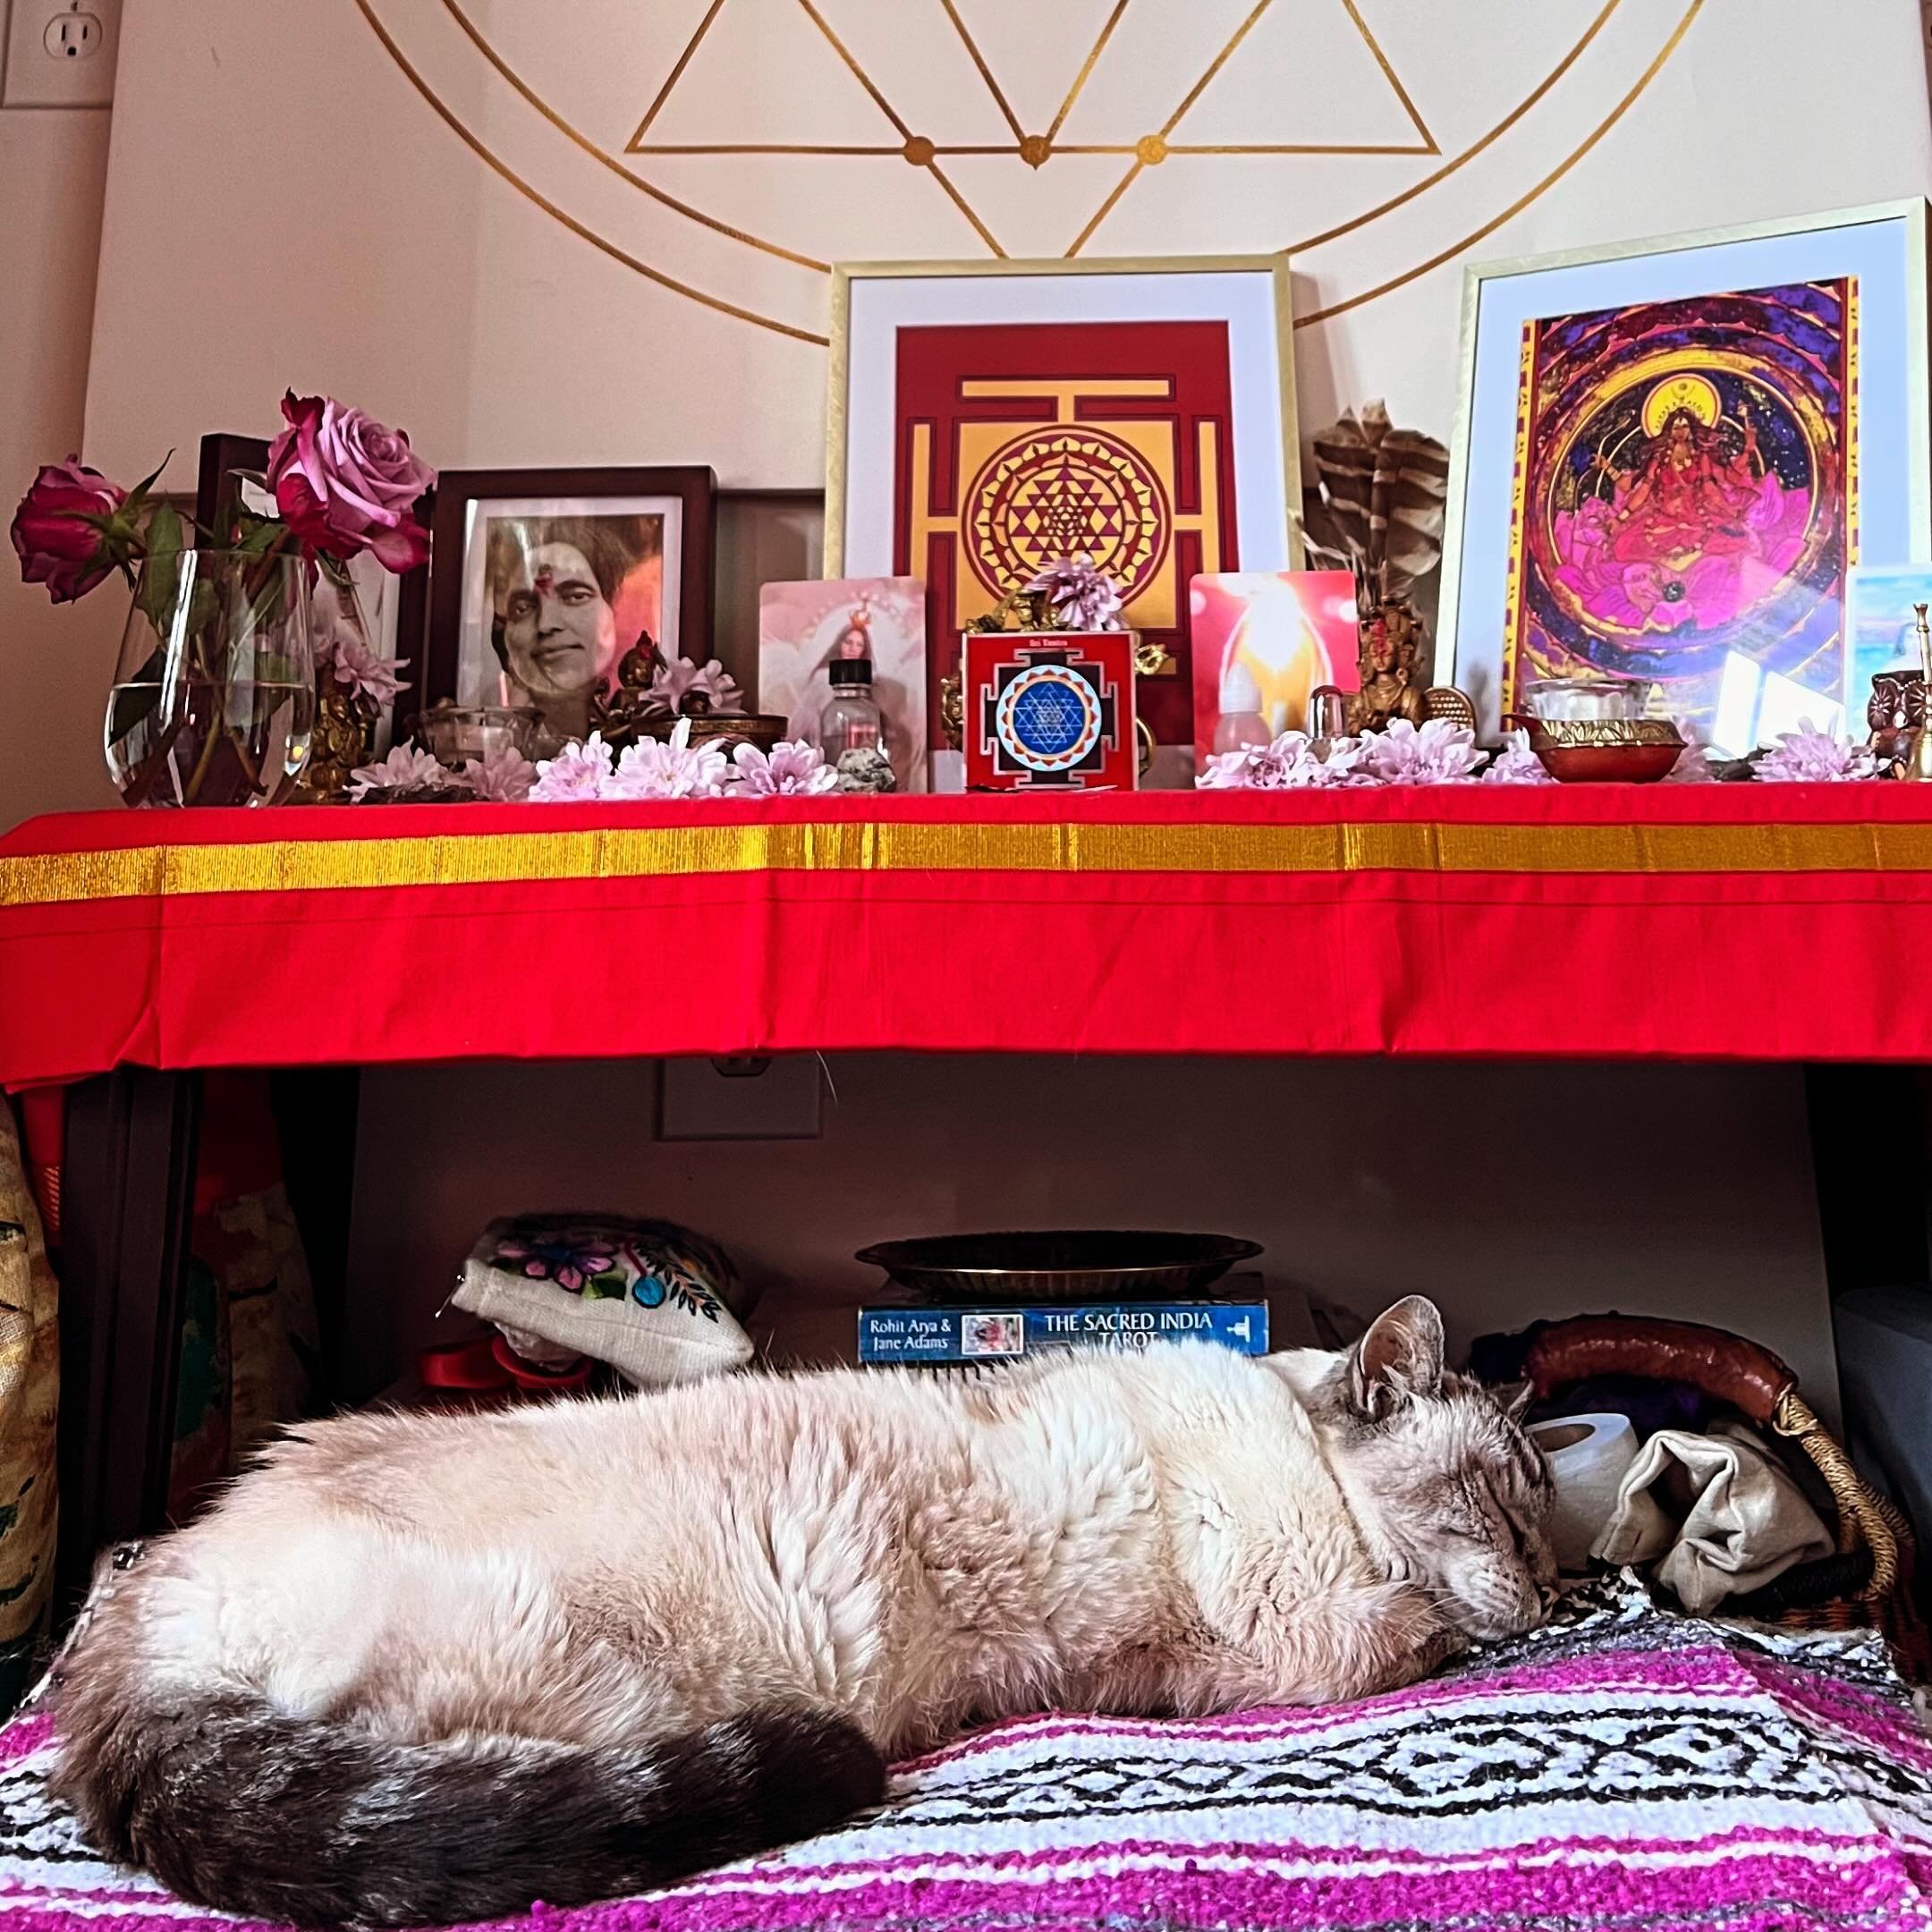 We are all intuitive beings. 

This beloved being had a hard time while I was in NC. Today when I returned and began chanting for him, he moved from his bed to the altar. 2 hours ago, his body was tense. Now, he lays in a relaxed position. 

We, too,